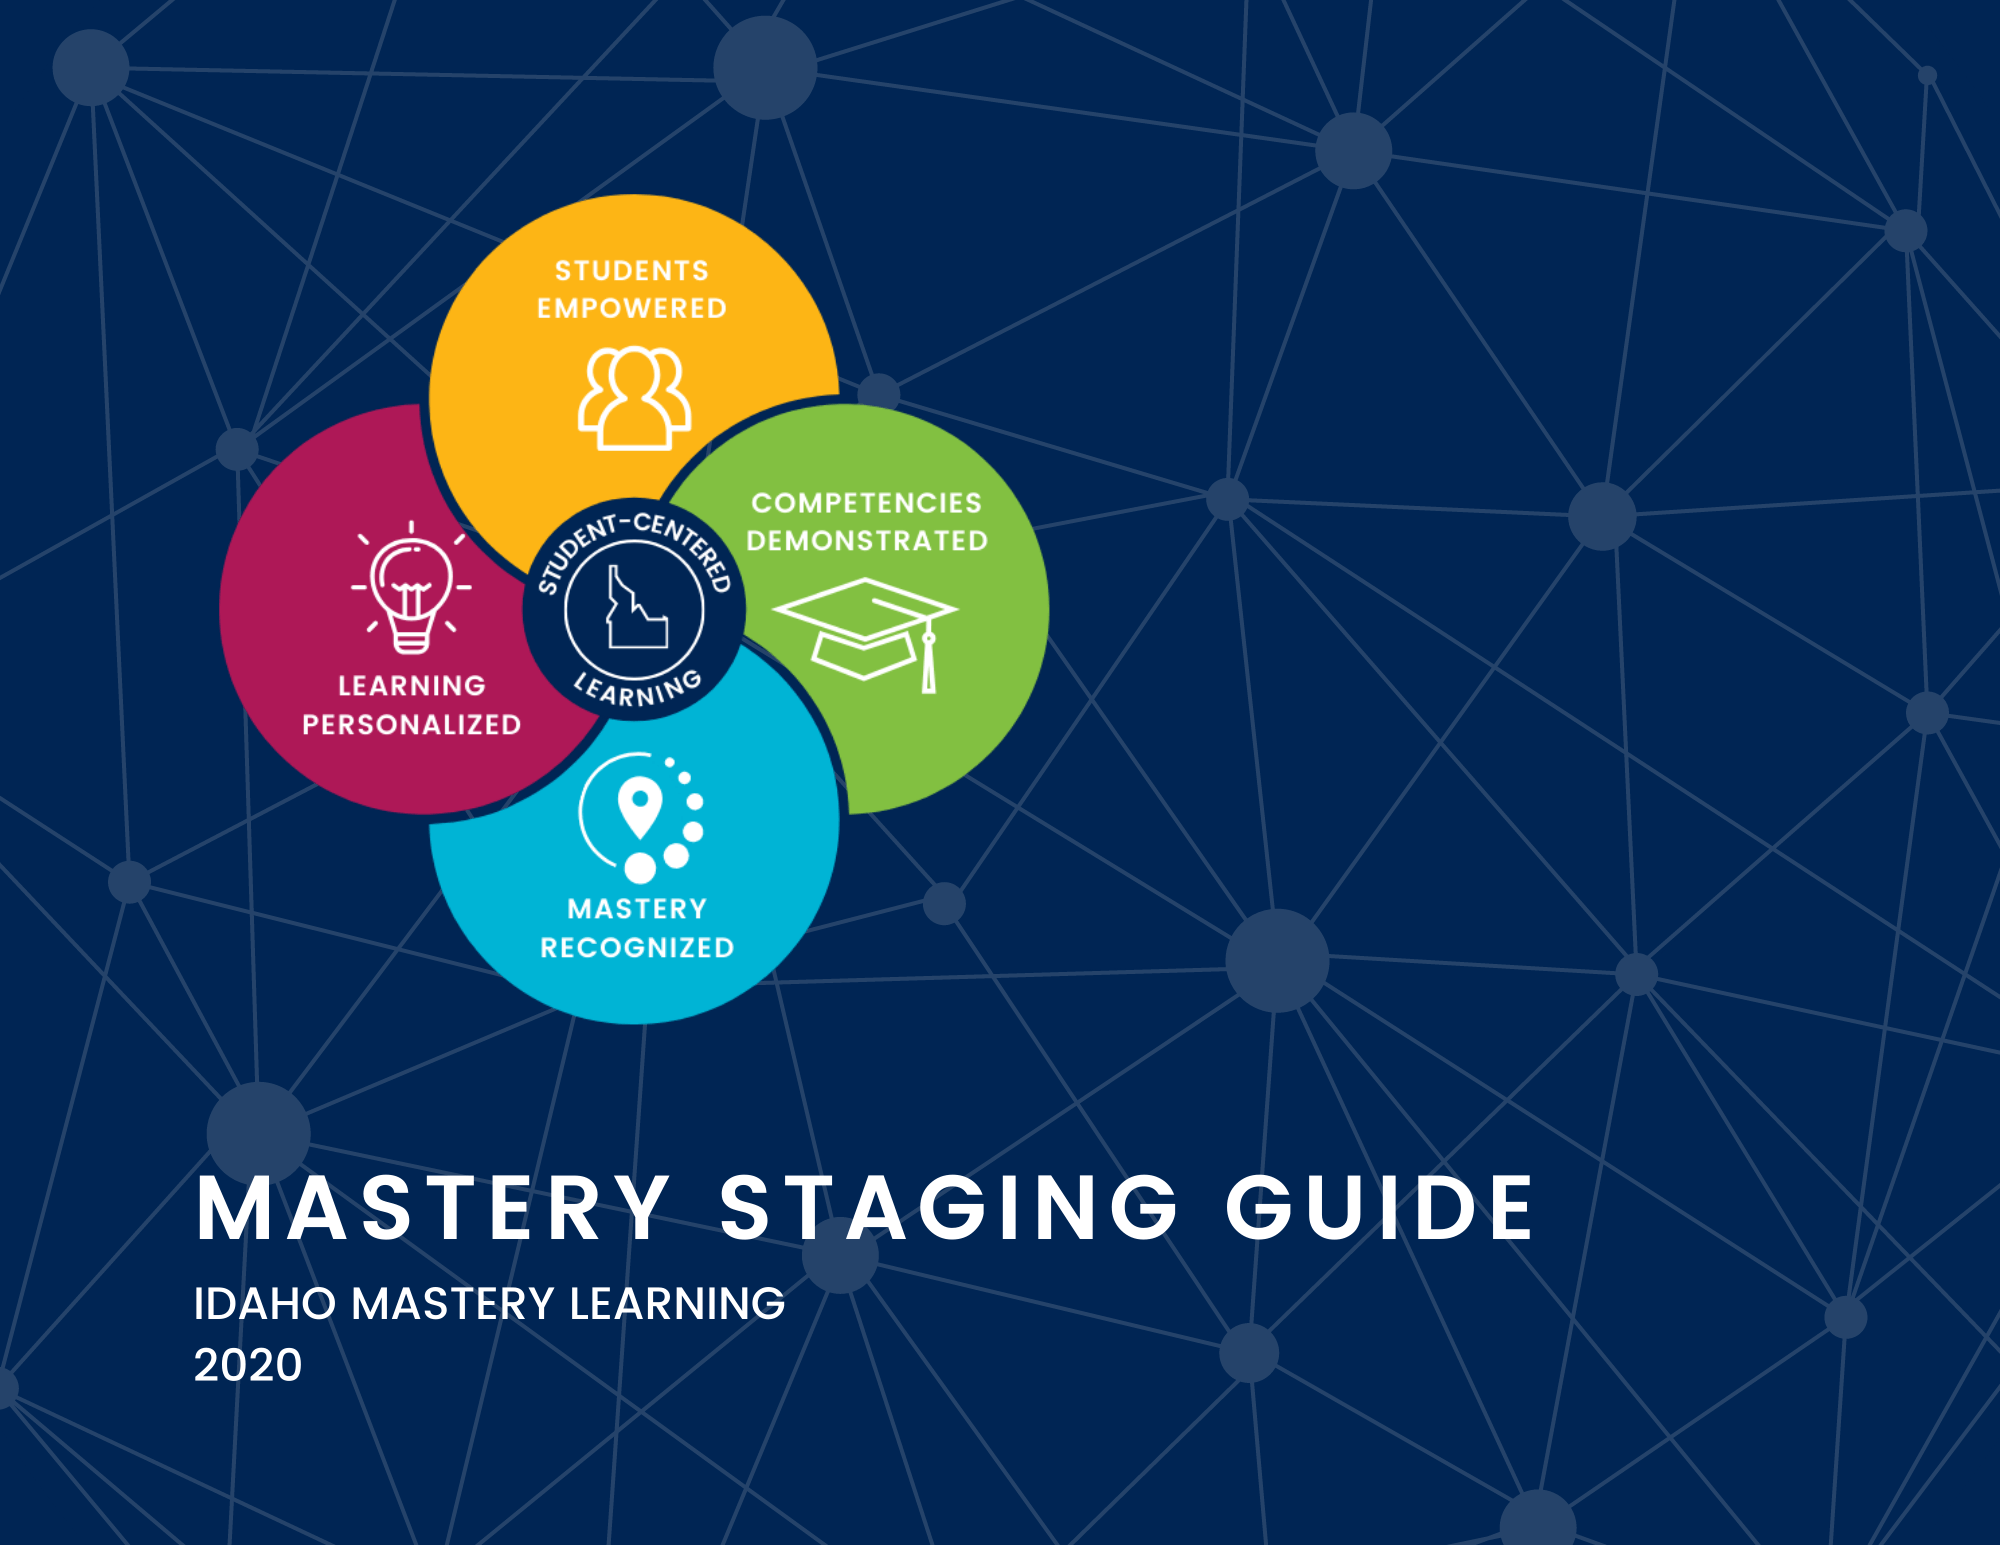 Idaho Mastery Learning Staging Guide